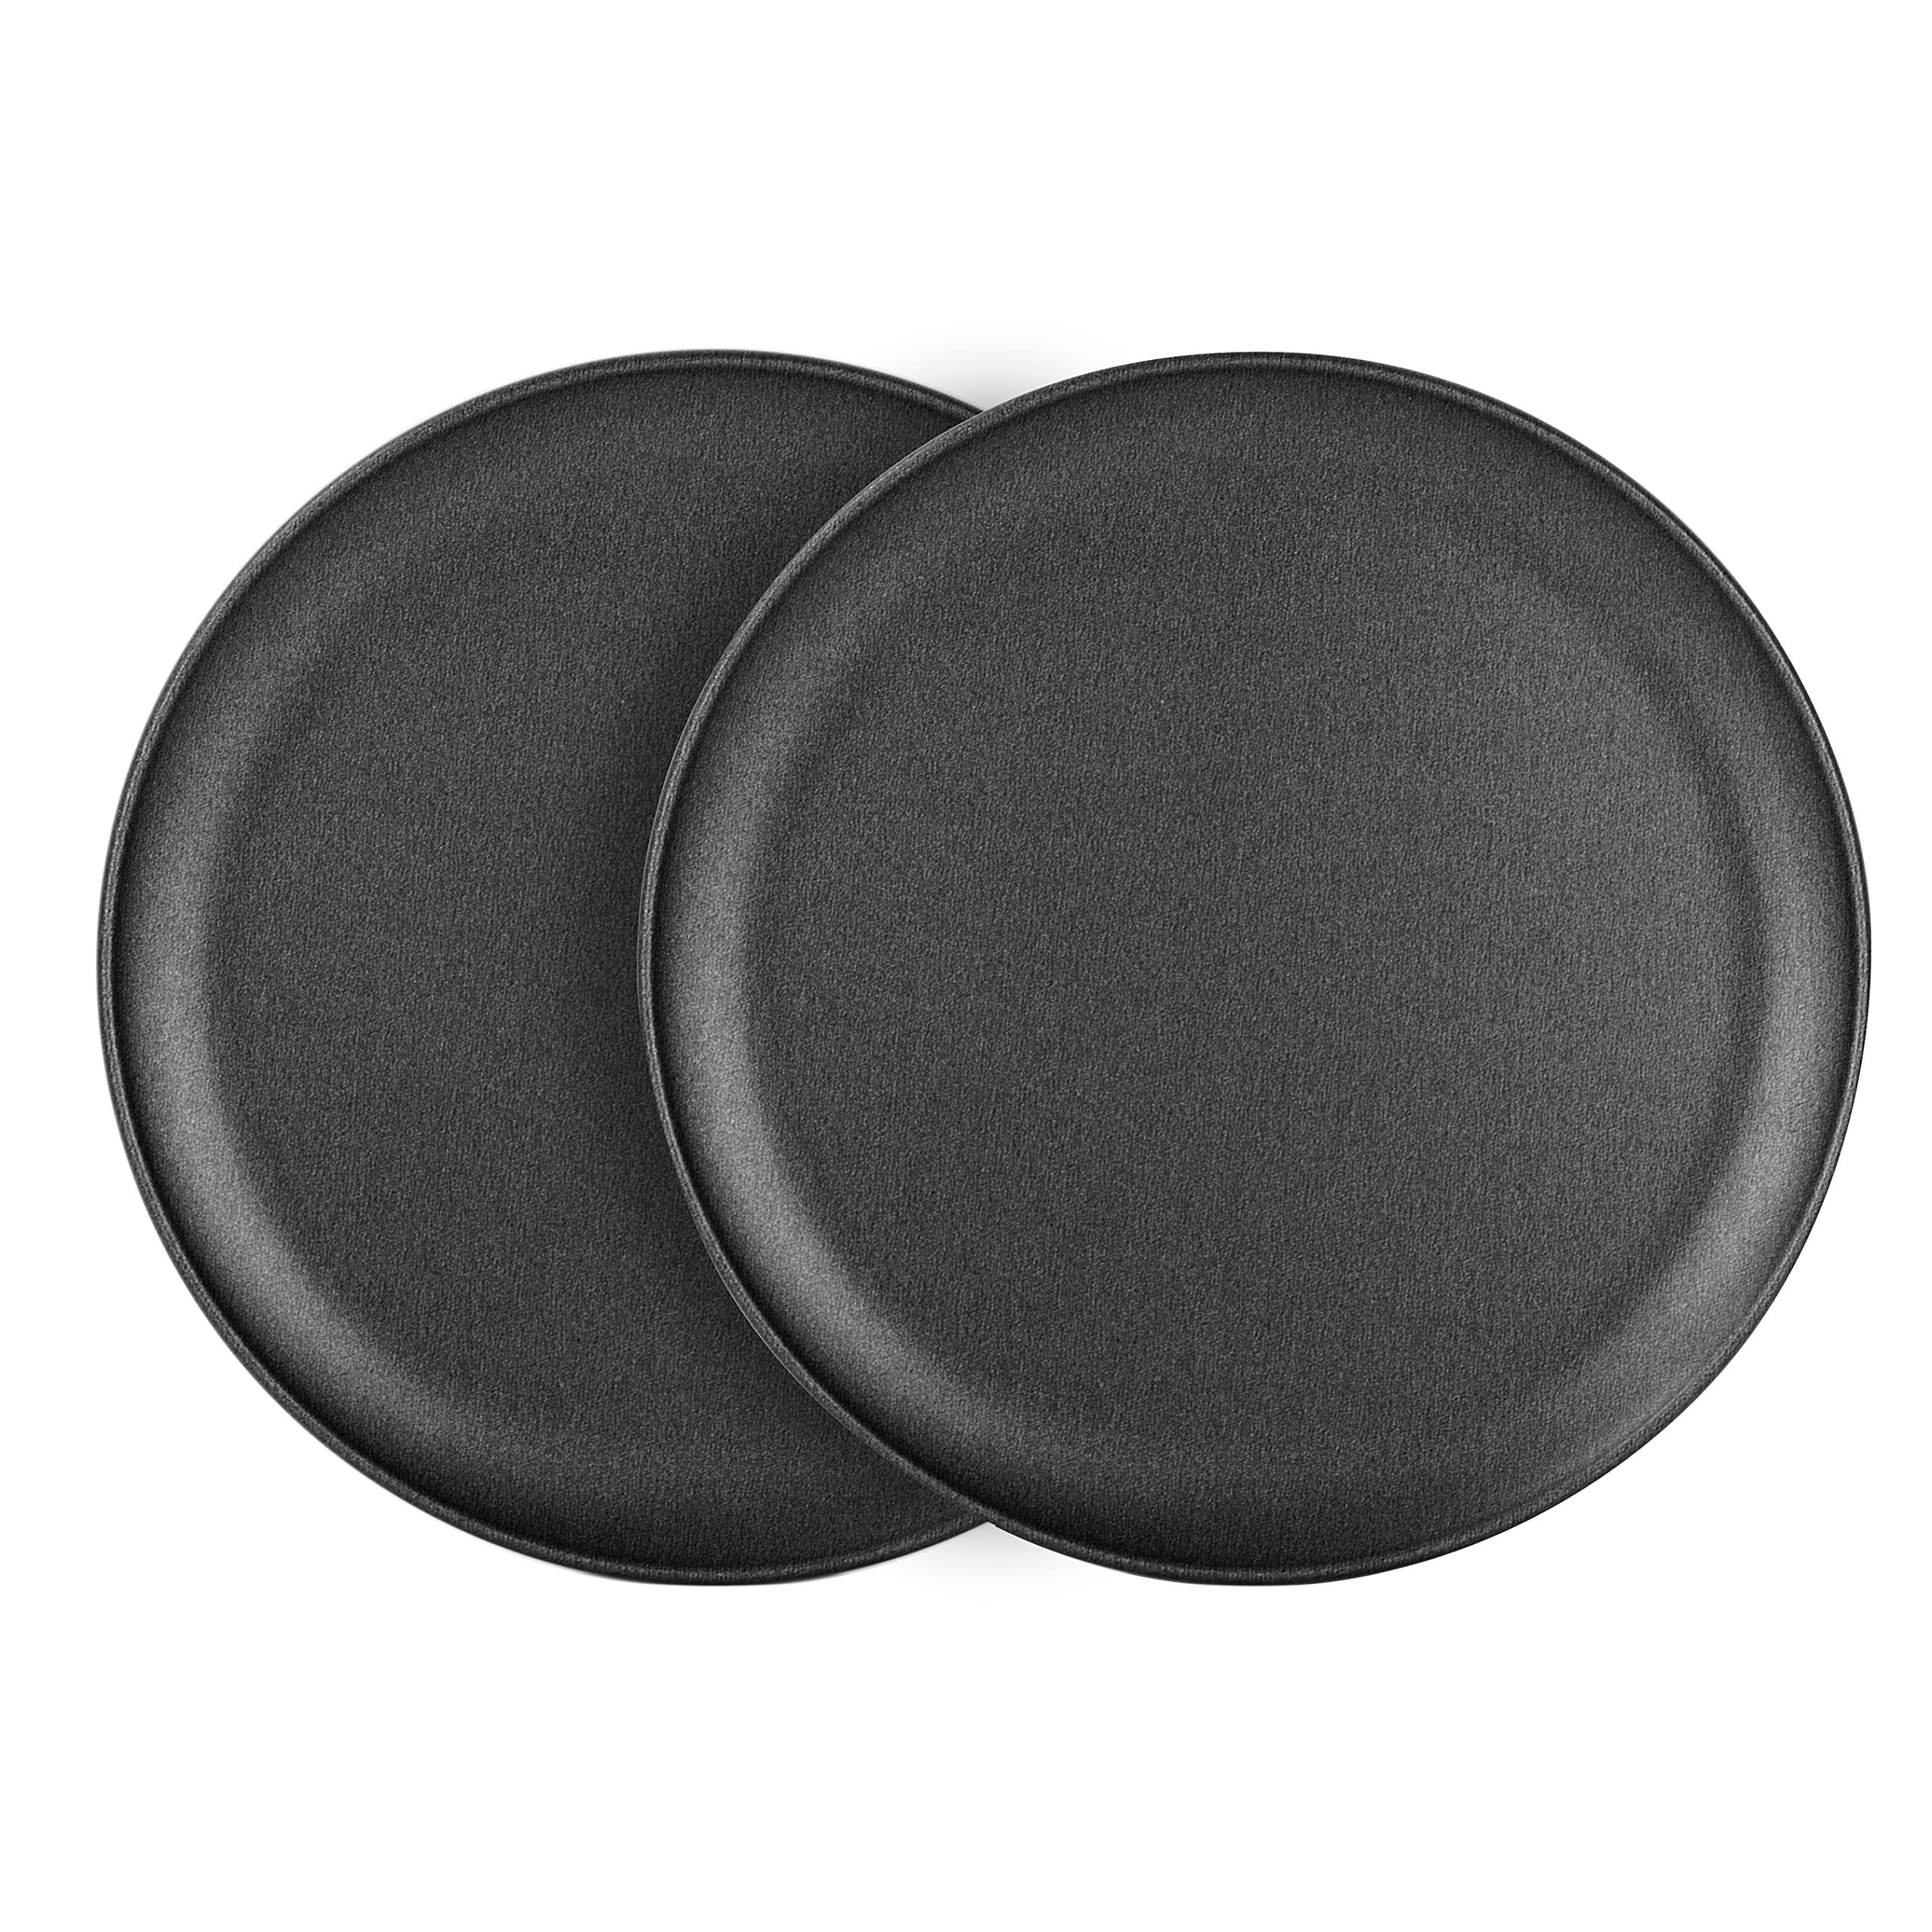 G&S Metal Products Companu ProBake Set of Two Nonstick 12-inch Pizza Pans, Dark Gray, PB245-AZ